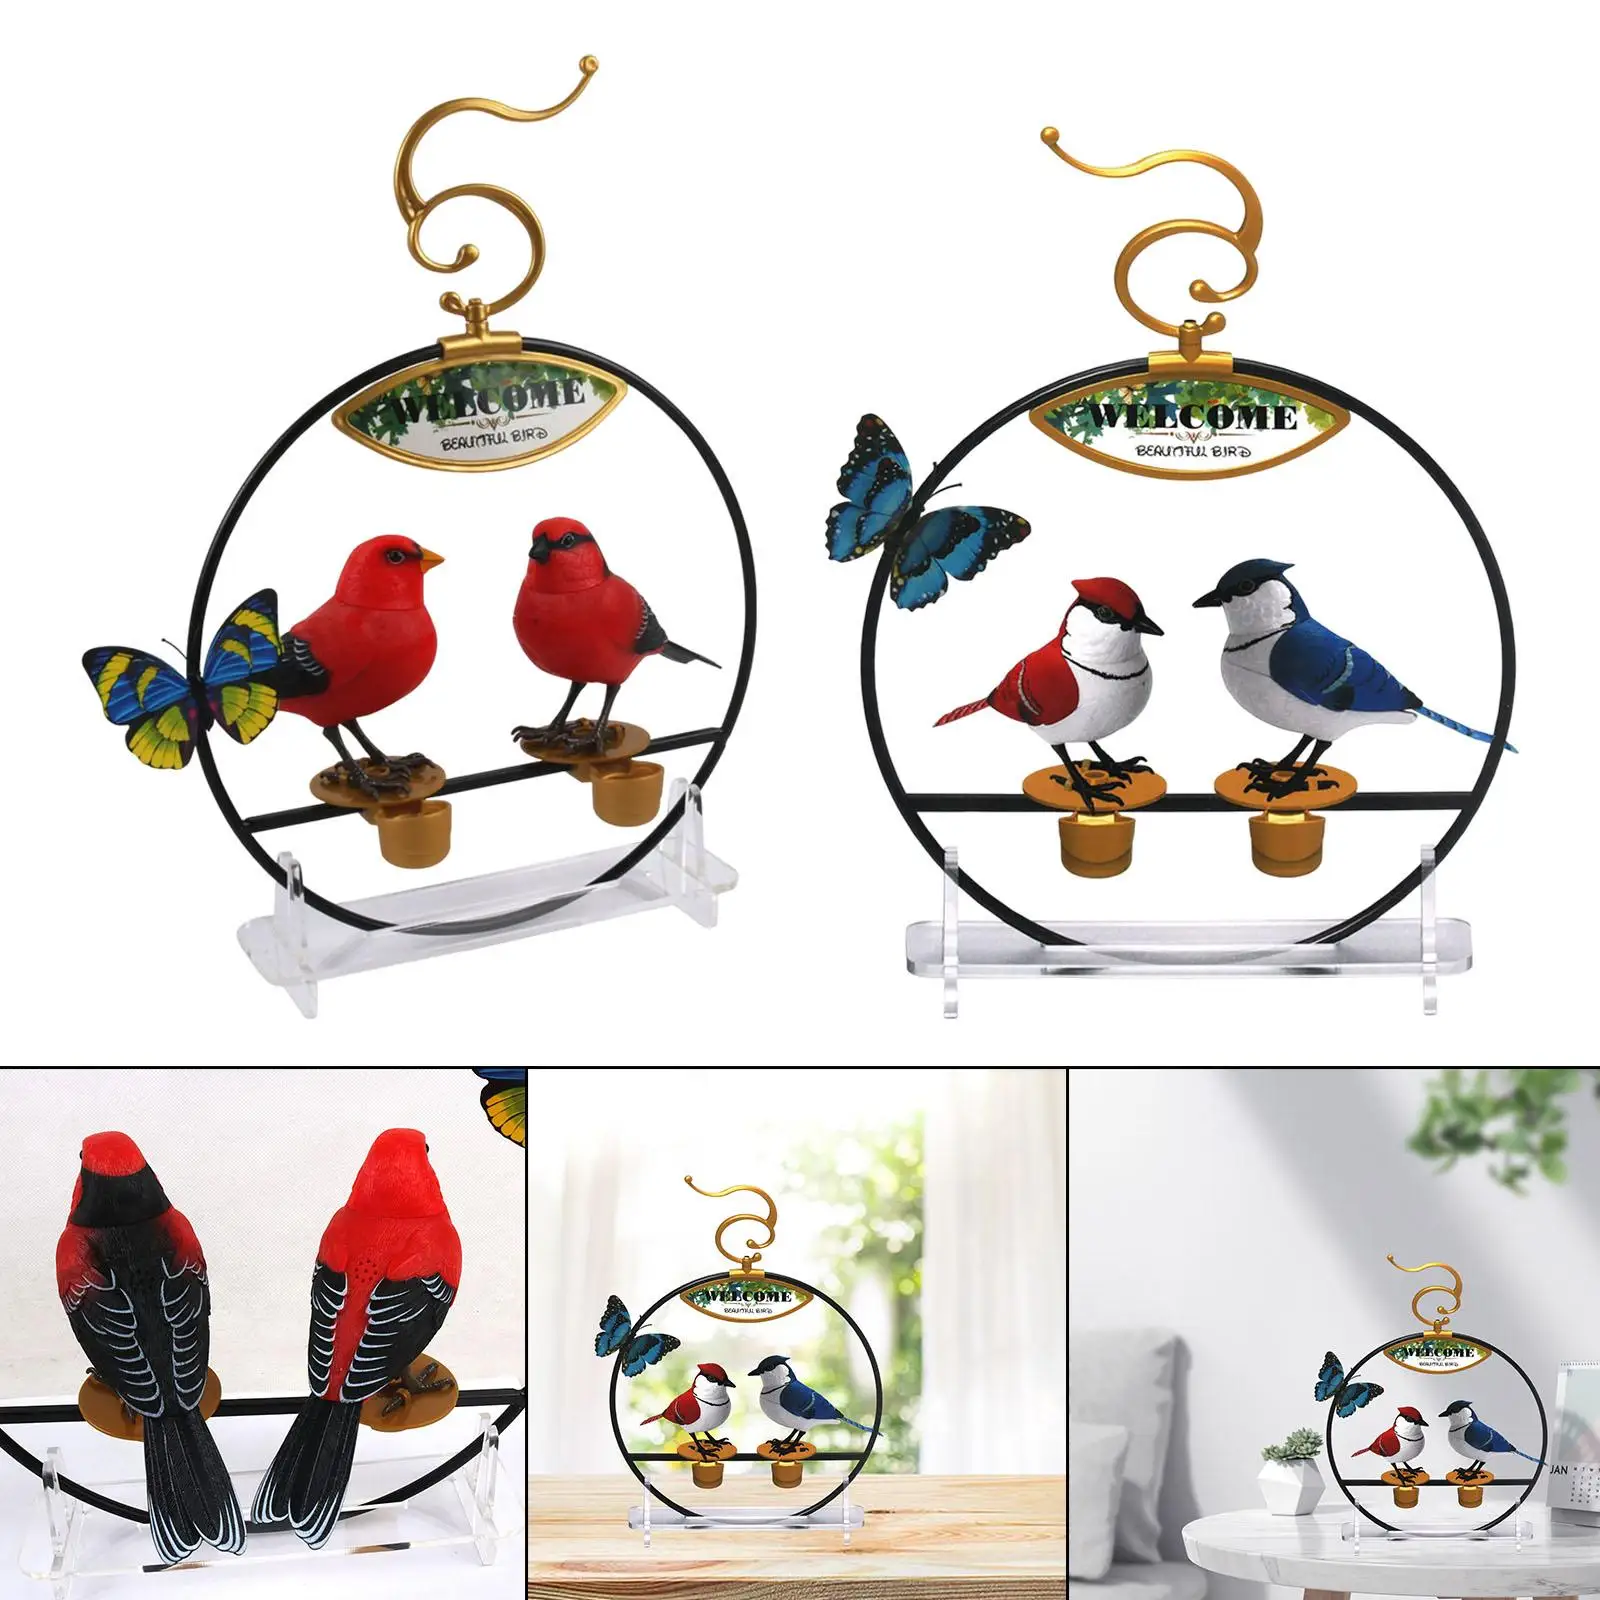 Adorable Chirping Dancing Parrots Bird with Sound Sensor Sound Activated Chirping Bird Kids Toy Gift Home Decoration